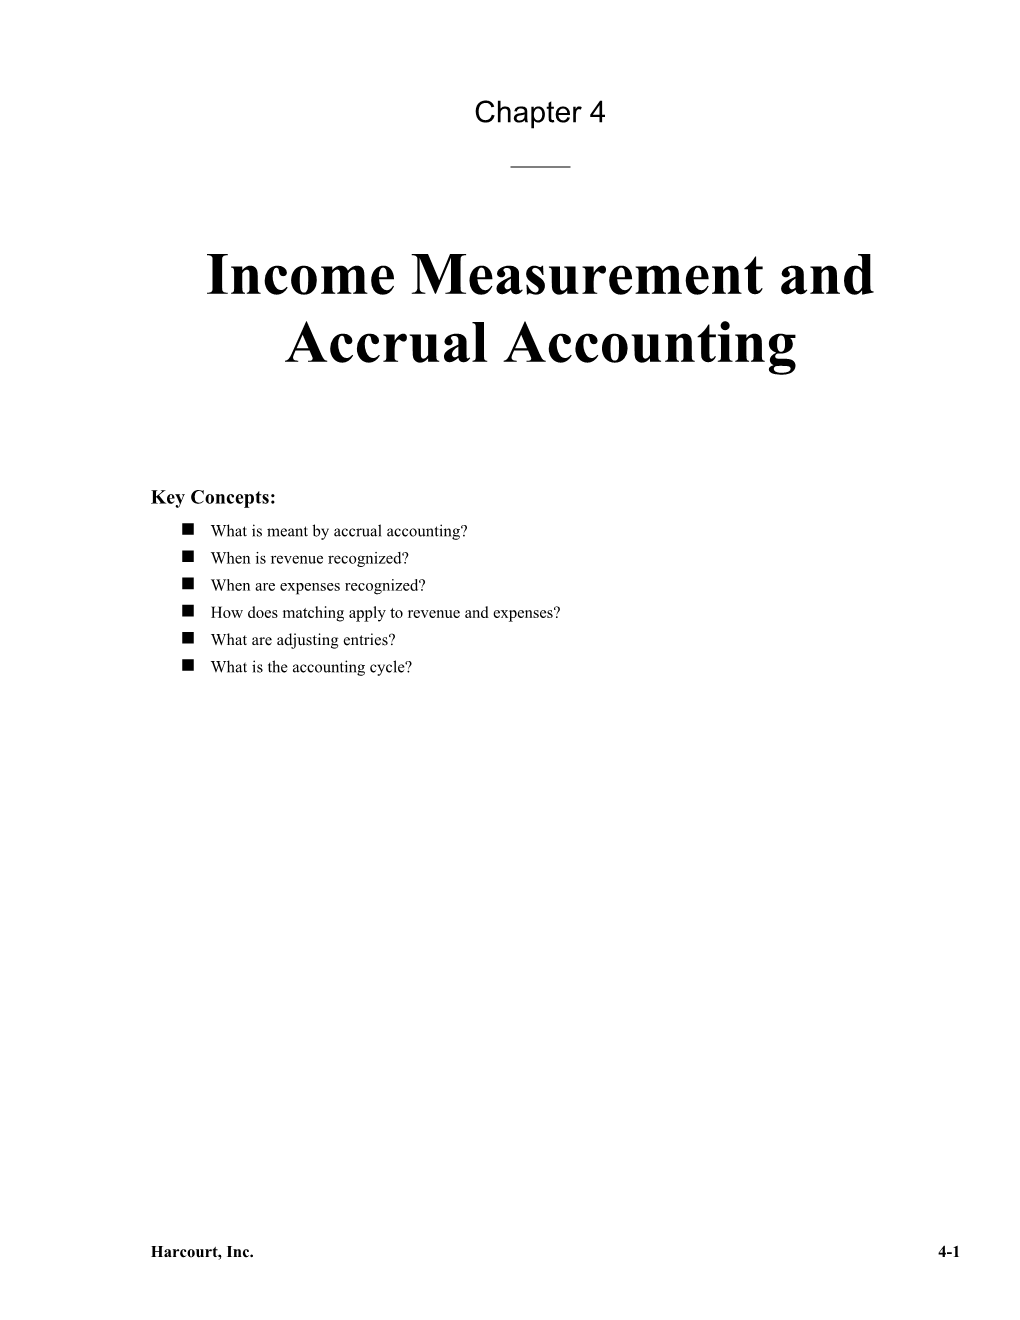 Income Measurement and Accrual Accounting